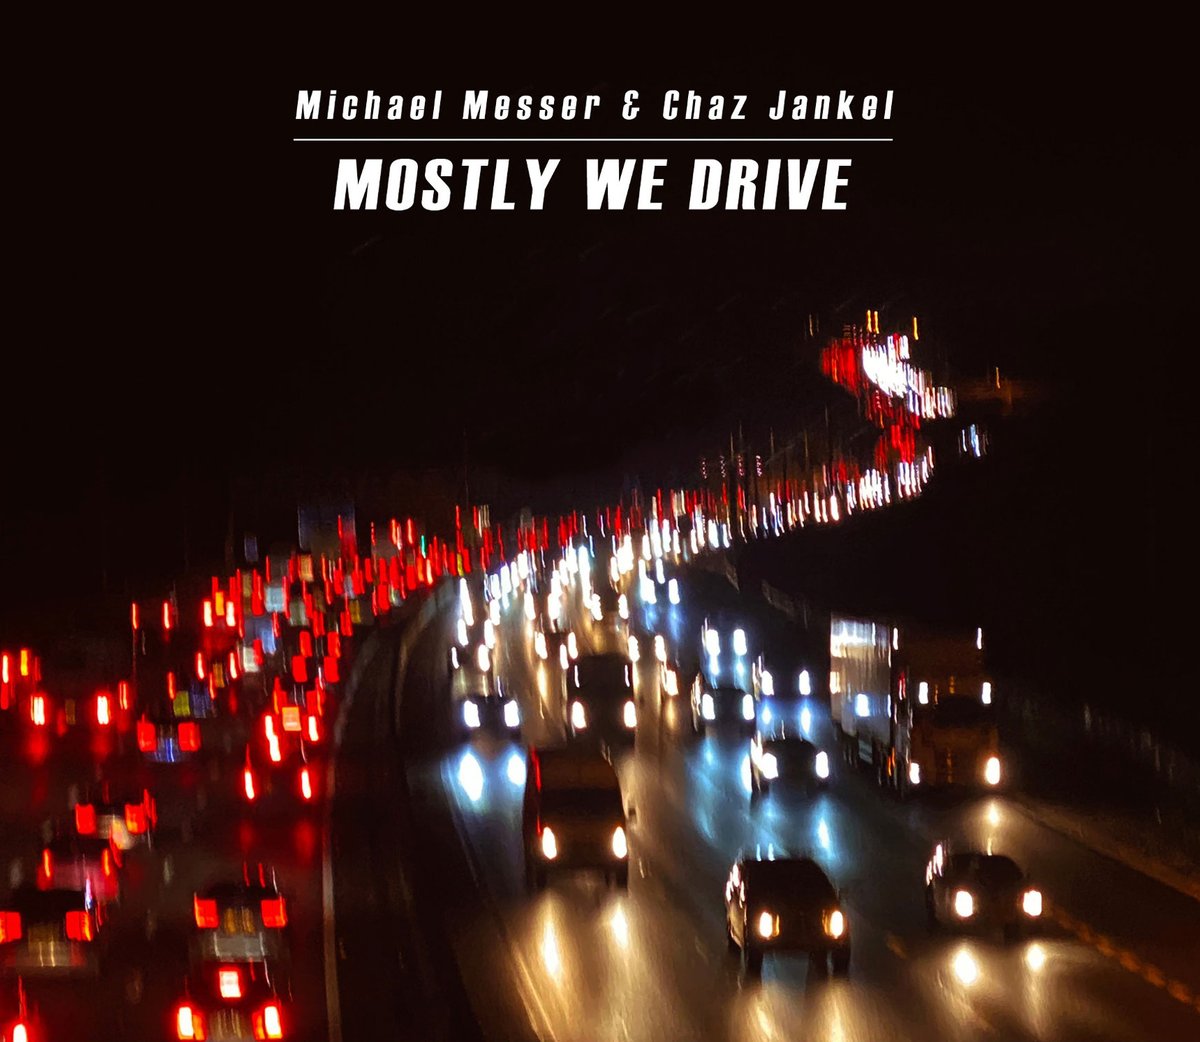 If you've enjoyed our new album #MostlyWeDrive, please do give it a share! And if you're new to it, you can watch, listen and find out more at: linktr.ee/messerjankel